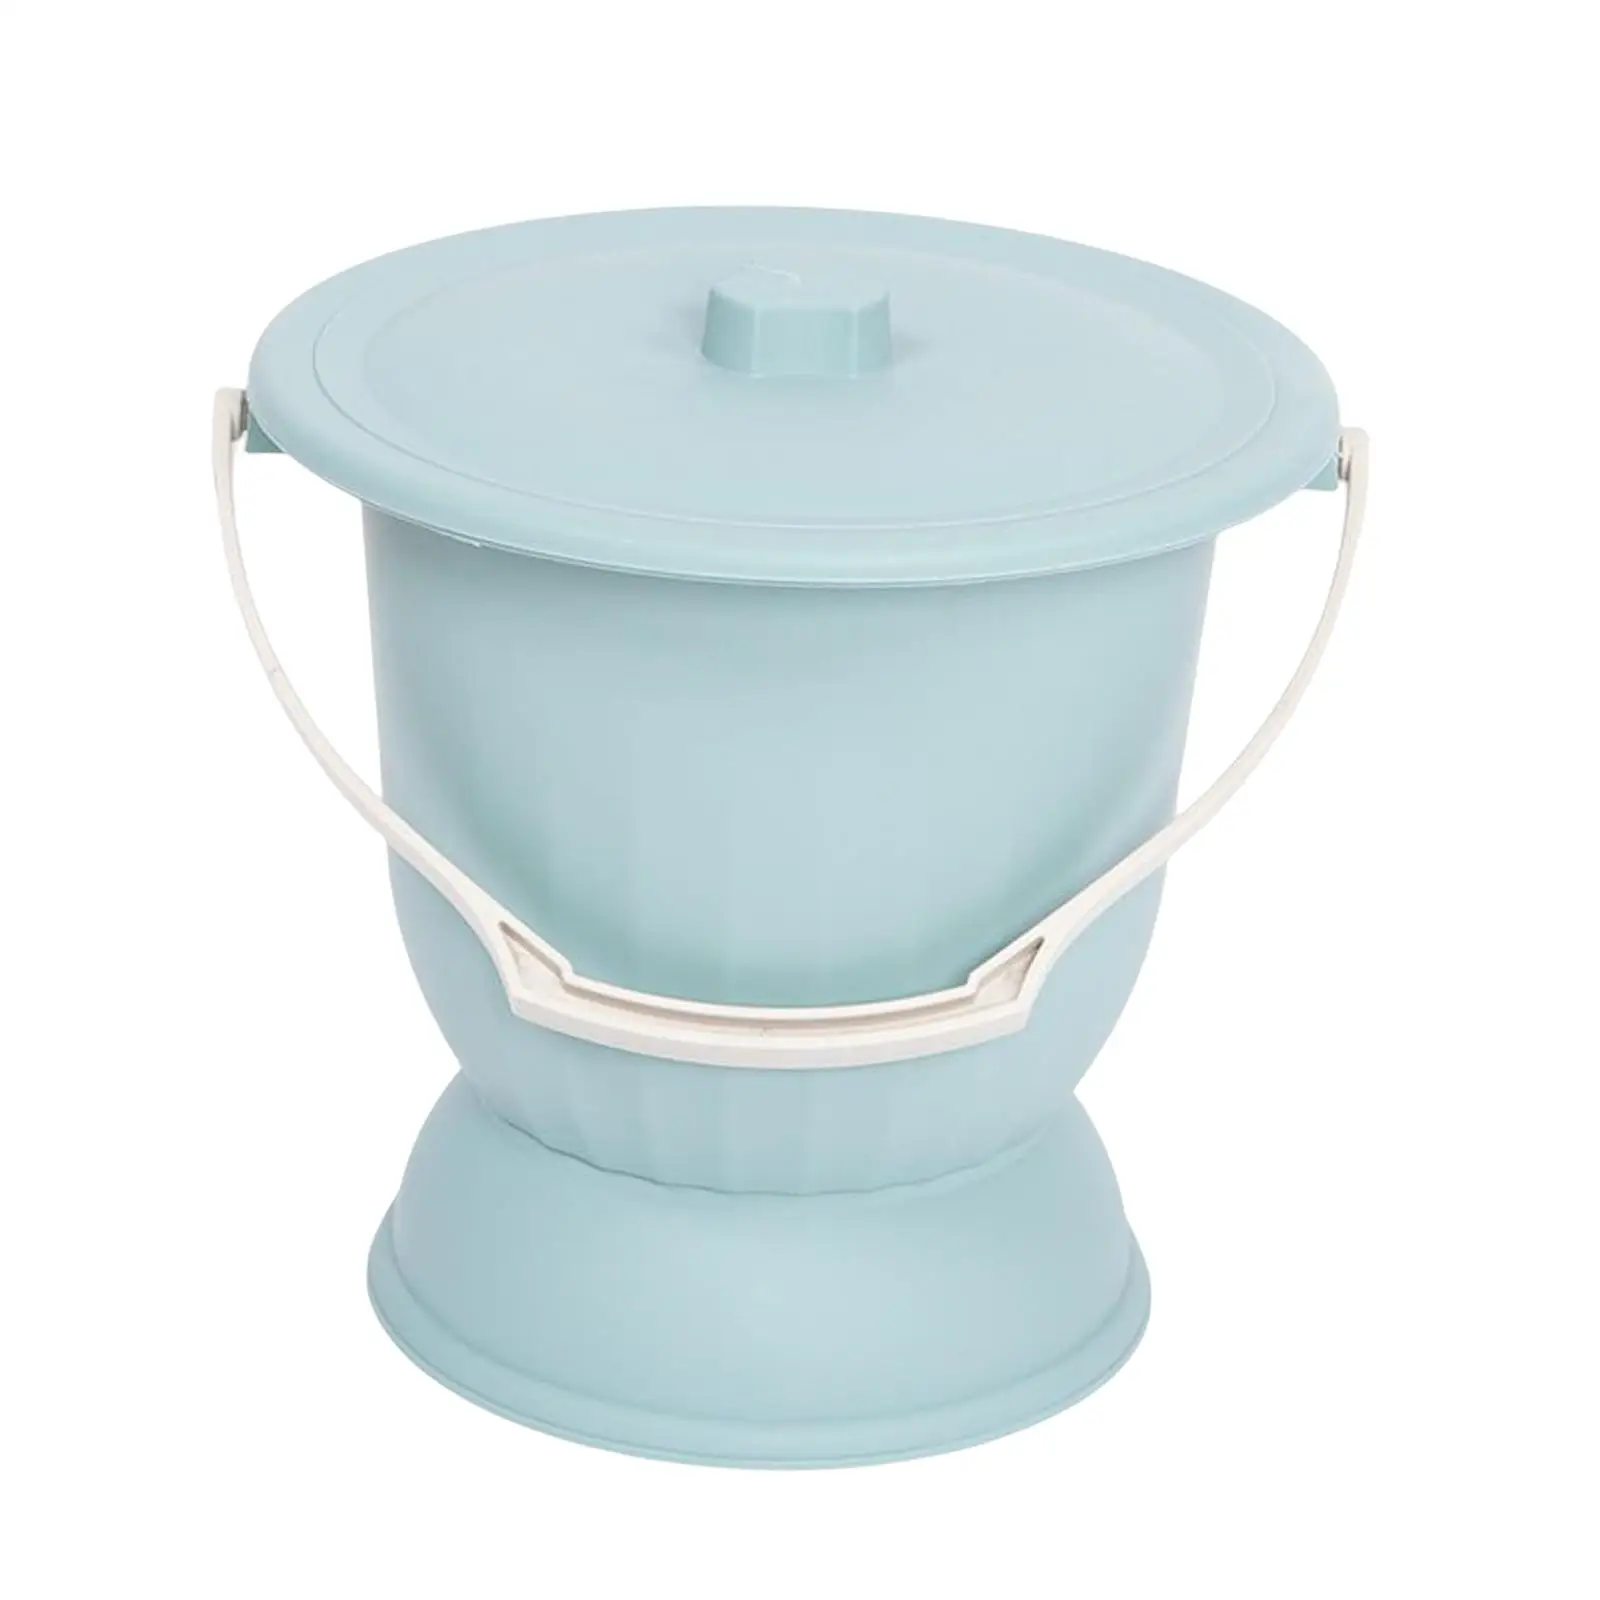 

Handheld Spittoon with Lid Mini Toilets Bedpan Splashproof Urinal Chamber Pot Thickened for Female Male Indoor Bedroom